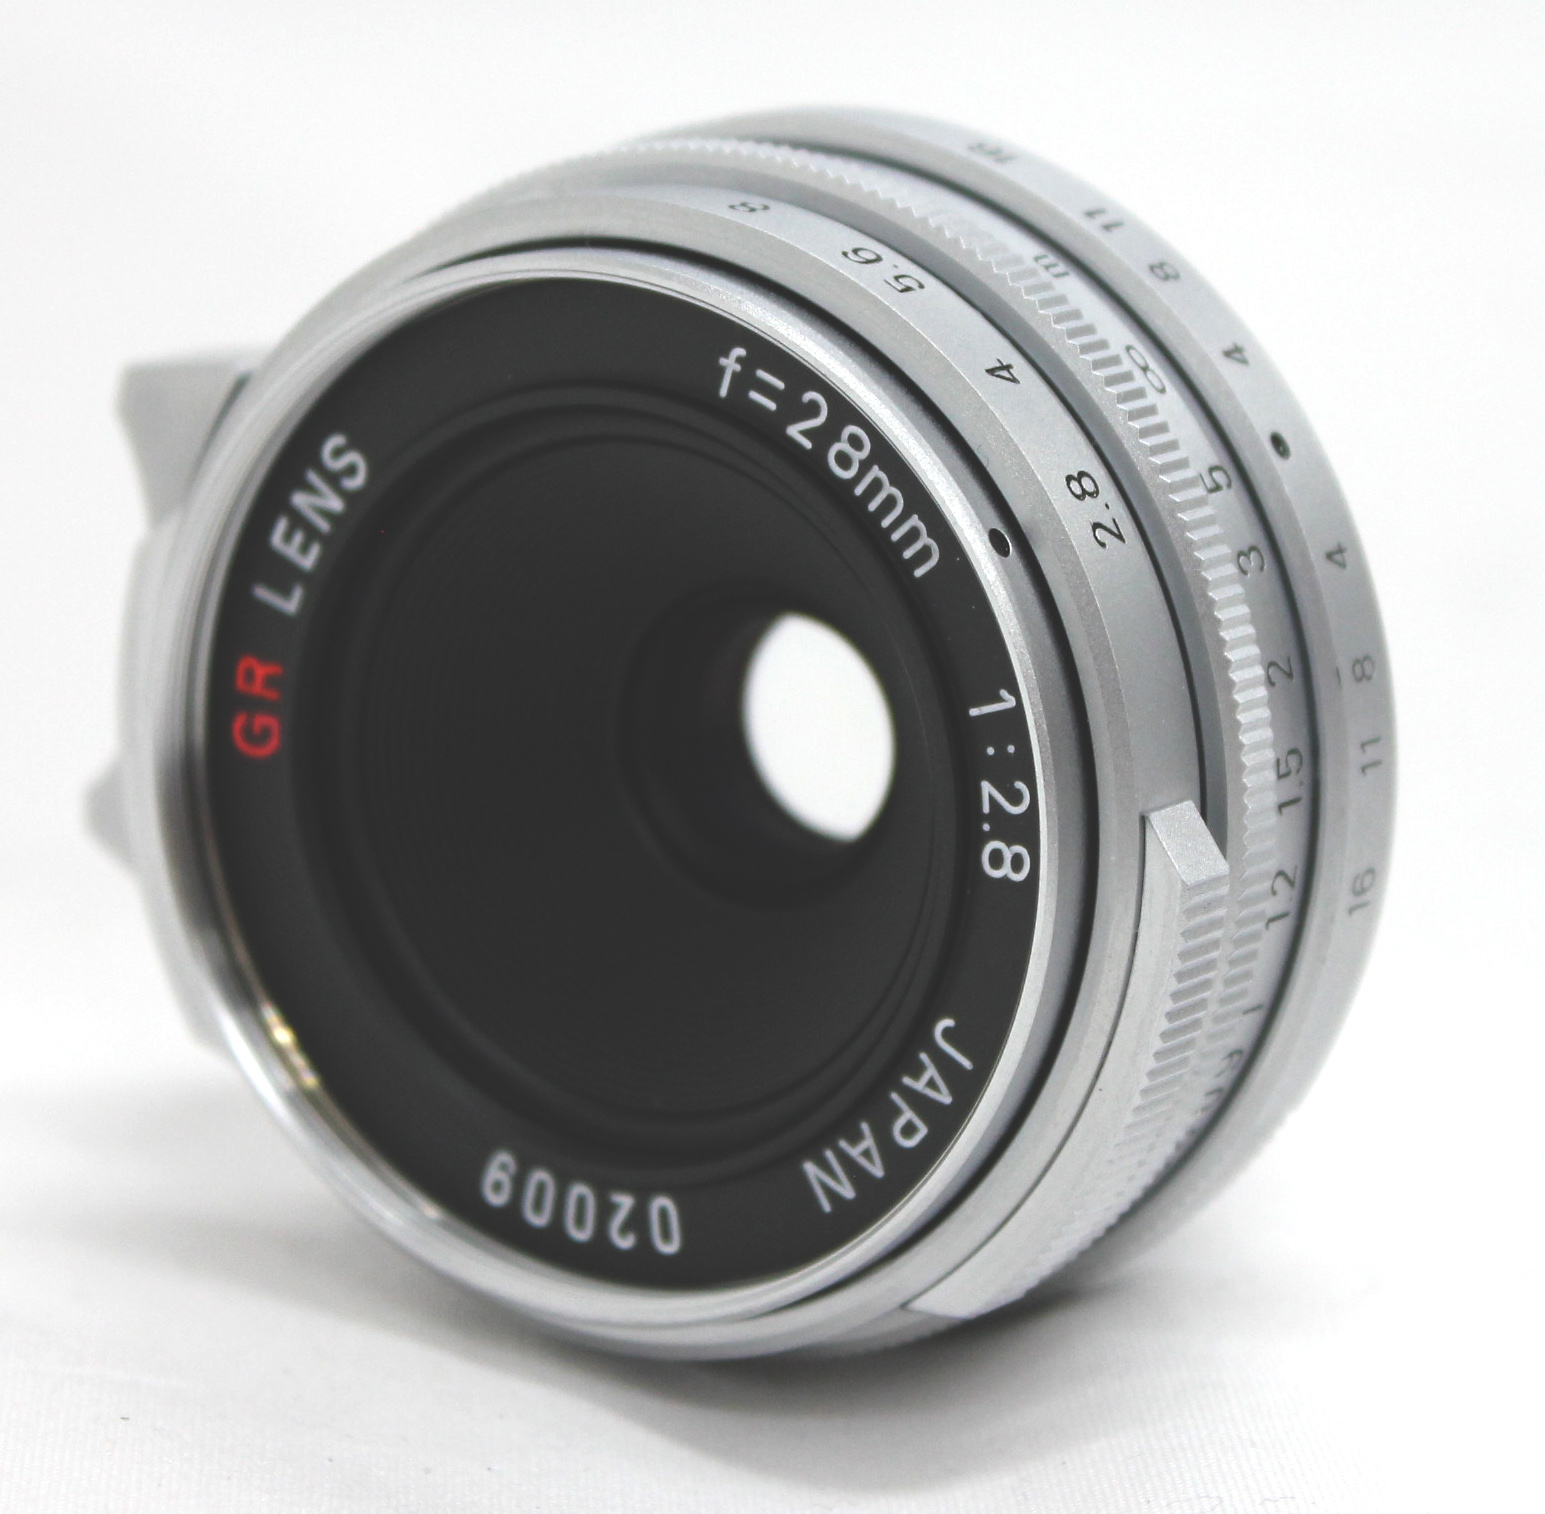  Ricoh GR Lens 28mm F/2.8 for L39 LTM Leica Screw Mount with 28mm Finder in Box from Japan Photo 1